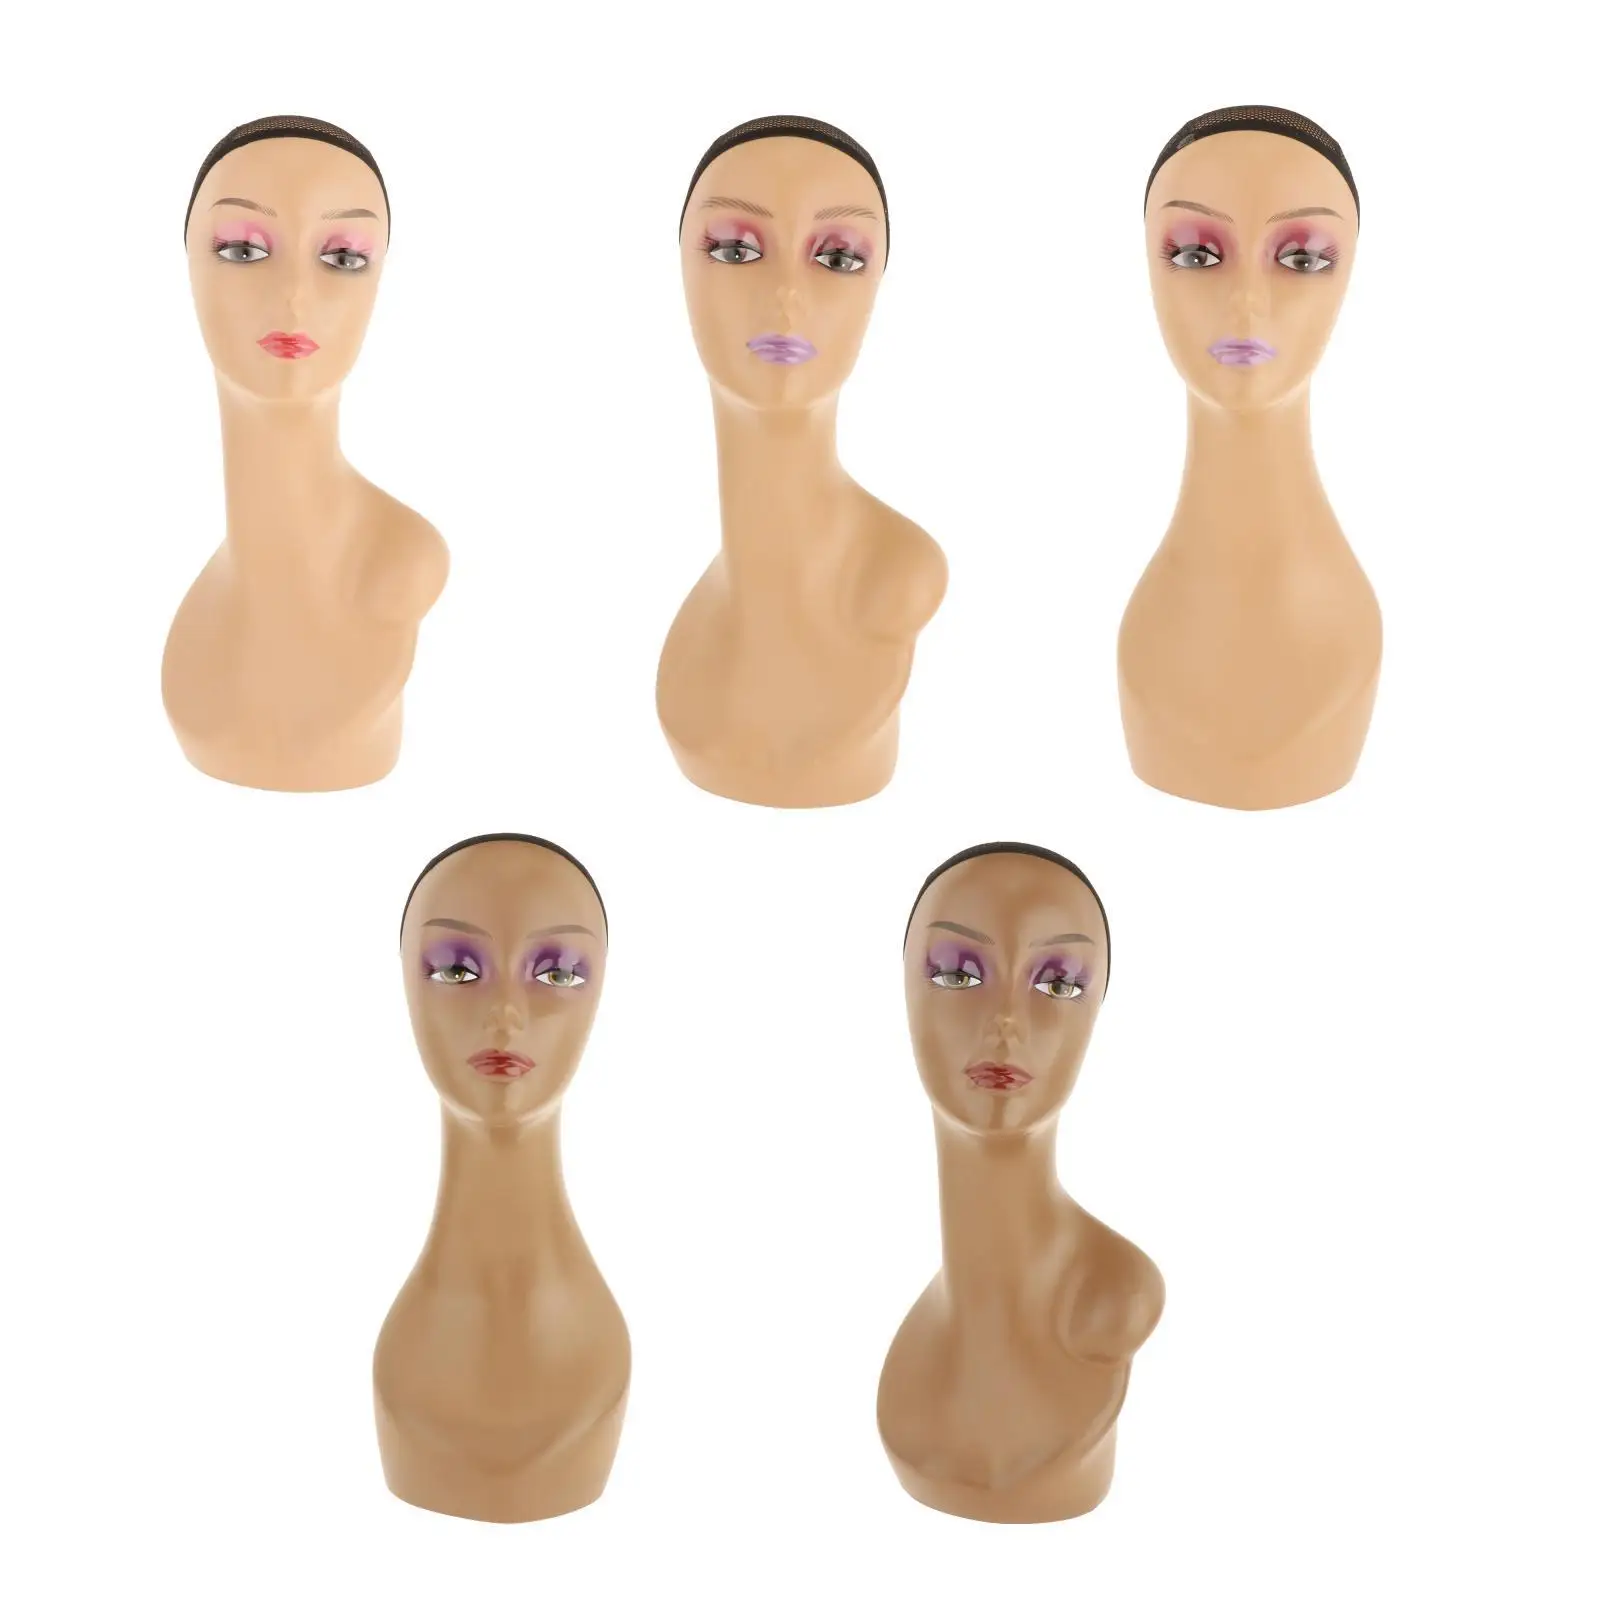  Heads Synthetic Fiber Hair with  Clamp Stands Manikin Heads Dolls for Hairdressing Training Models for Hairdresser